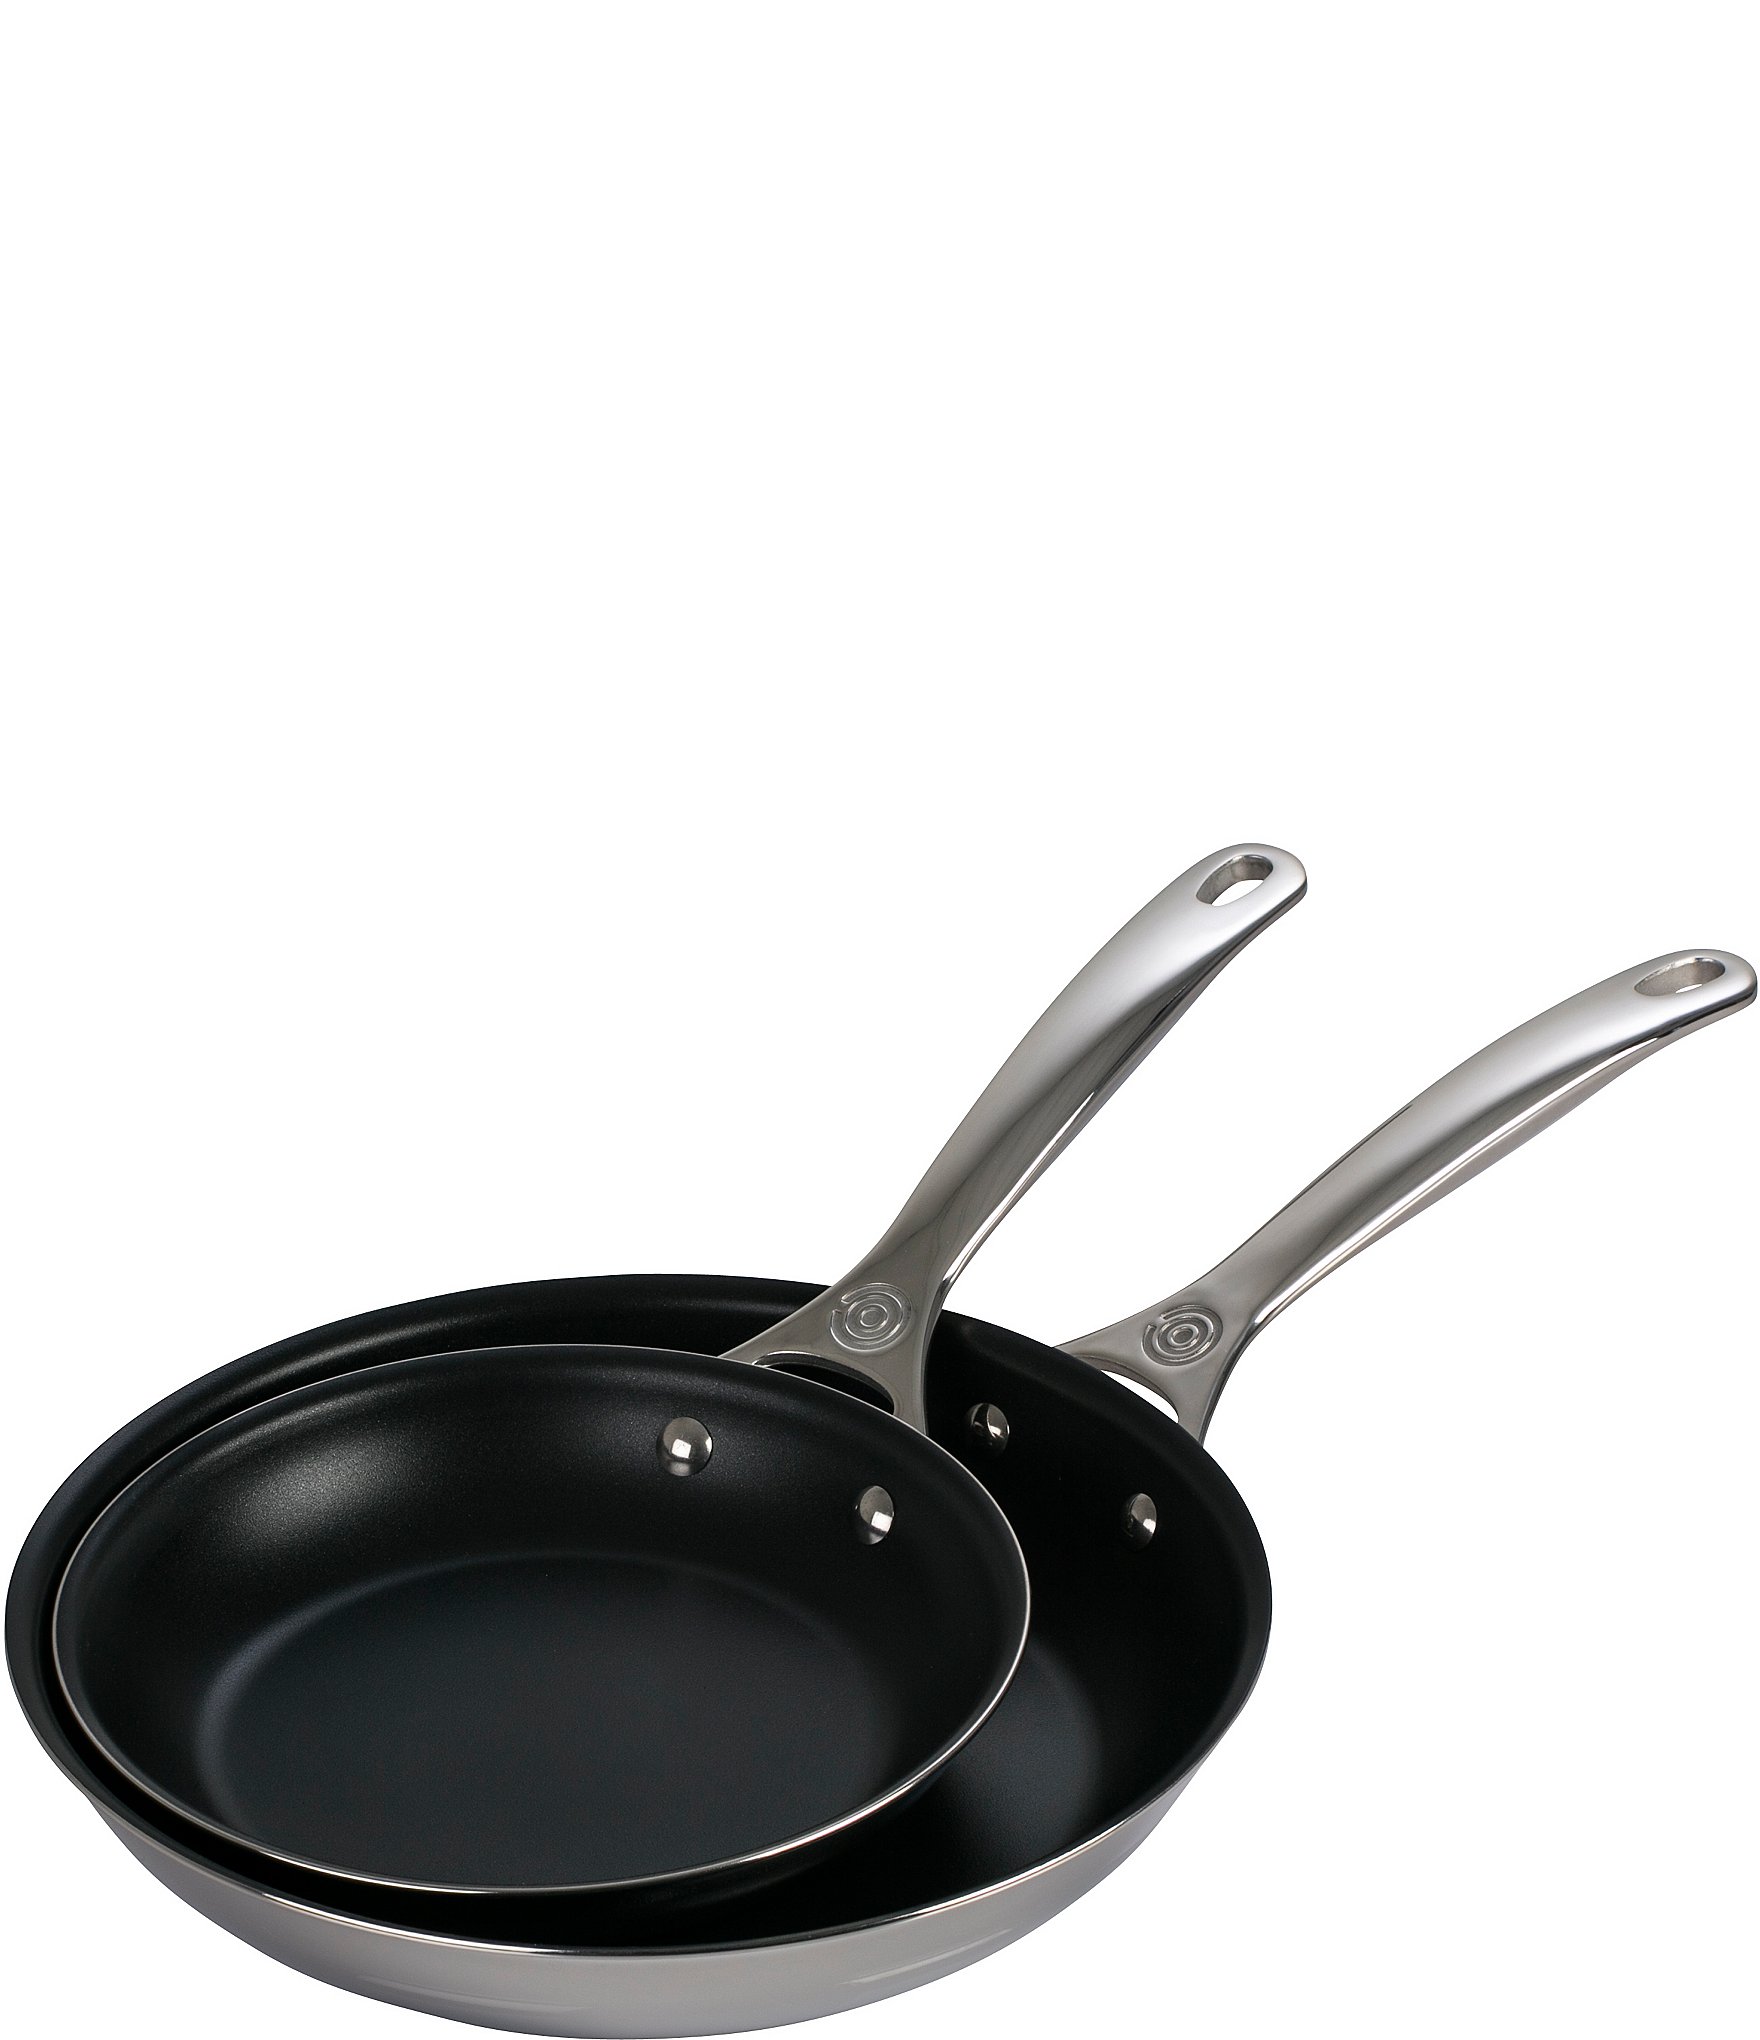 https://dimg.dillards.com/is/image/DillardsZoom/zoom/le-creuset-tri-ply-stainless-steel-nonstick-fry-pans-set-of-2/00000001_zi_stainless_steel05787091.jpg